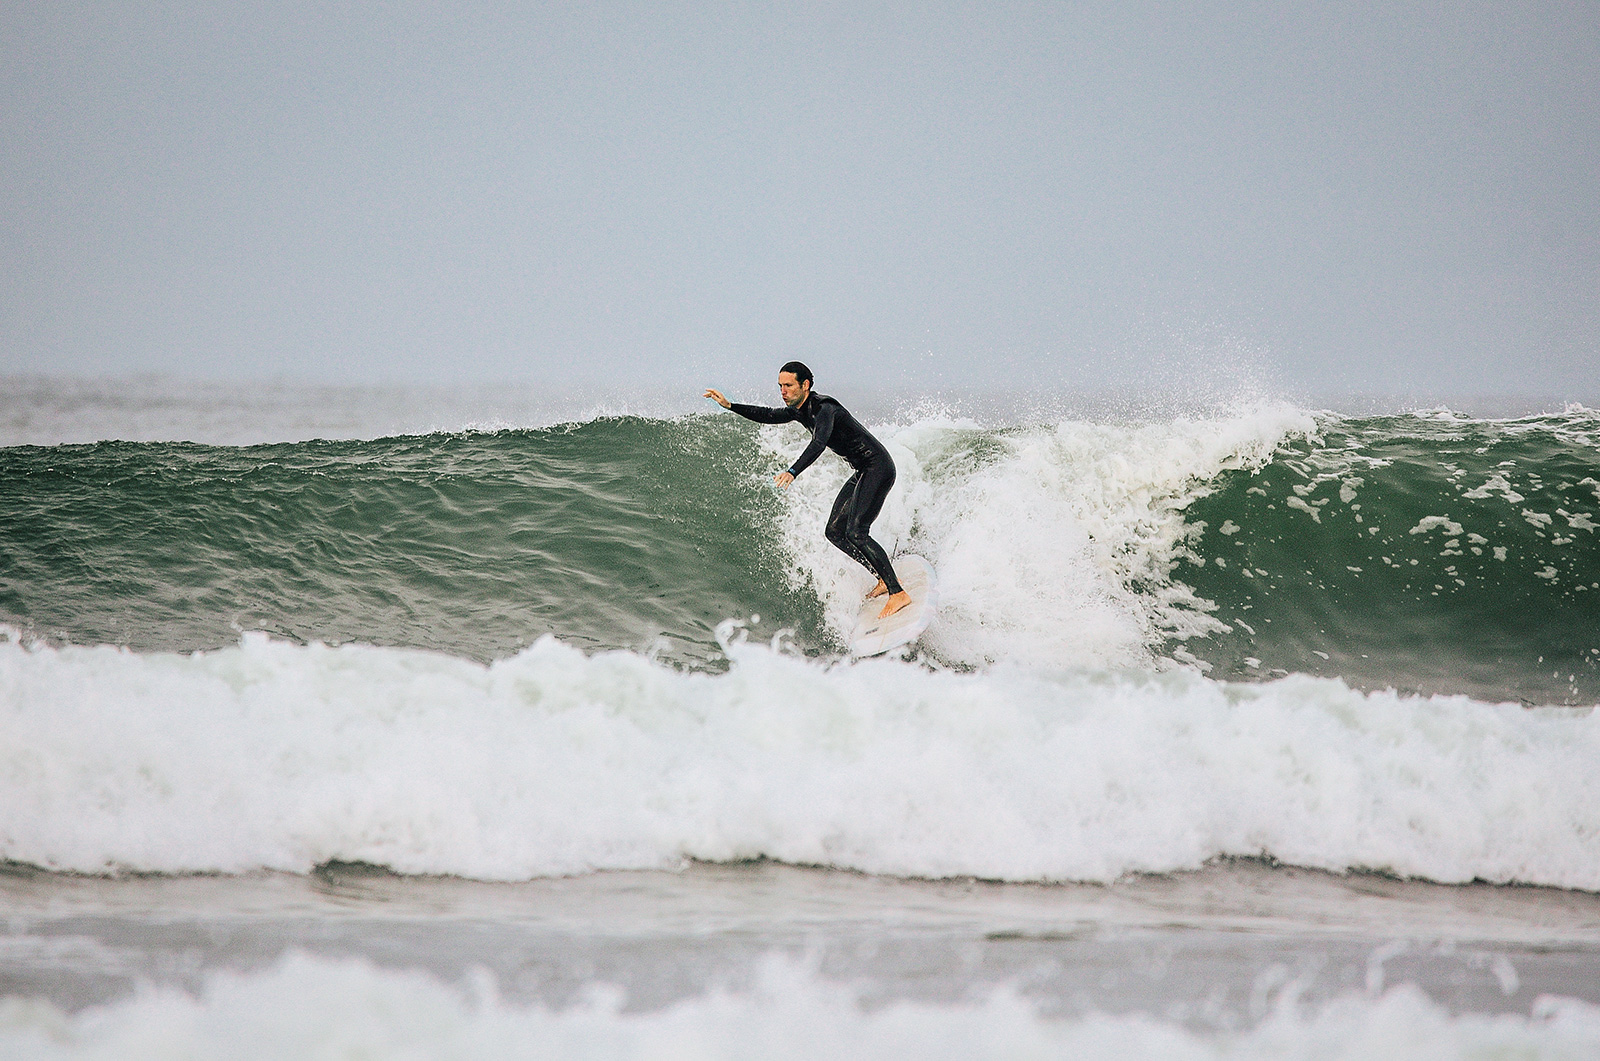 Brian Behrens catching a wave at Sunset Point along the PCH in Los Angeles, CA